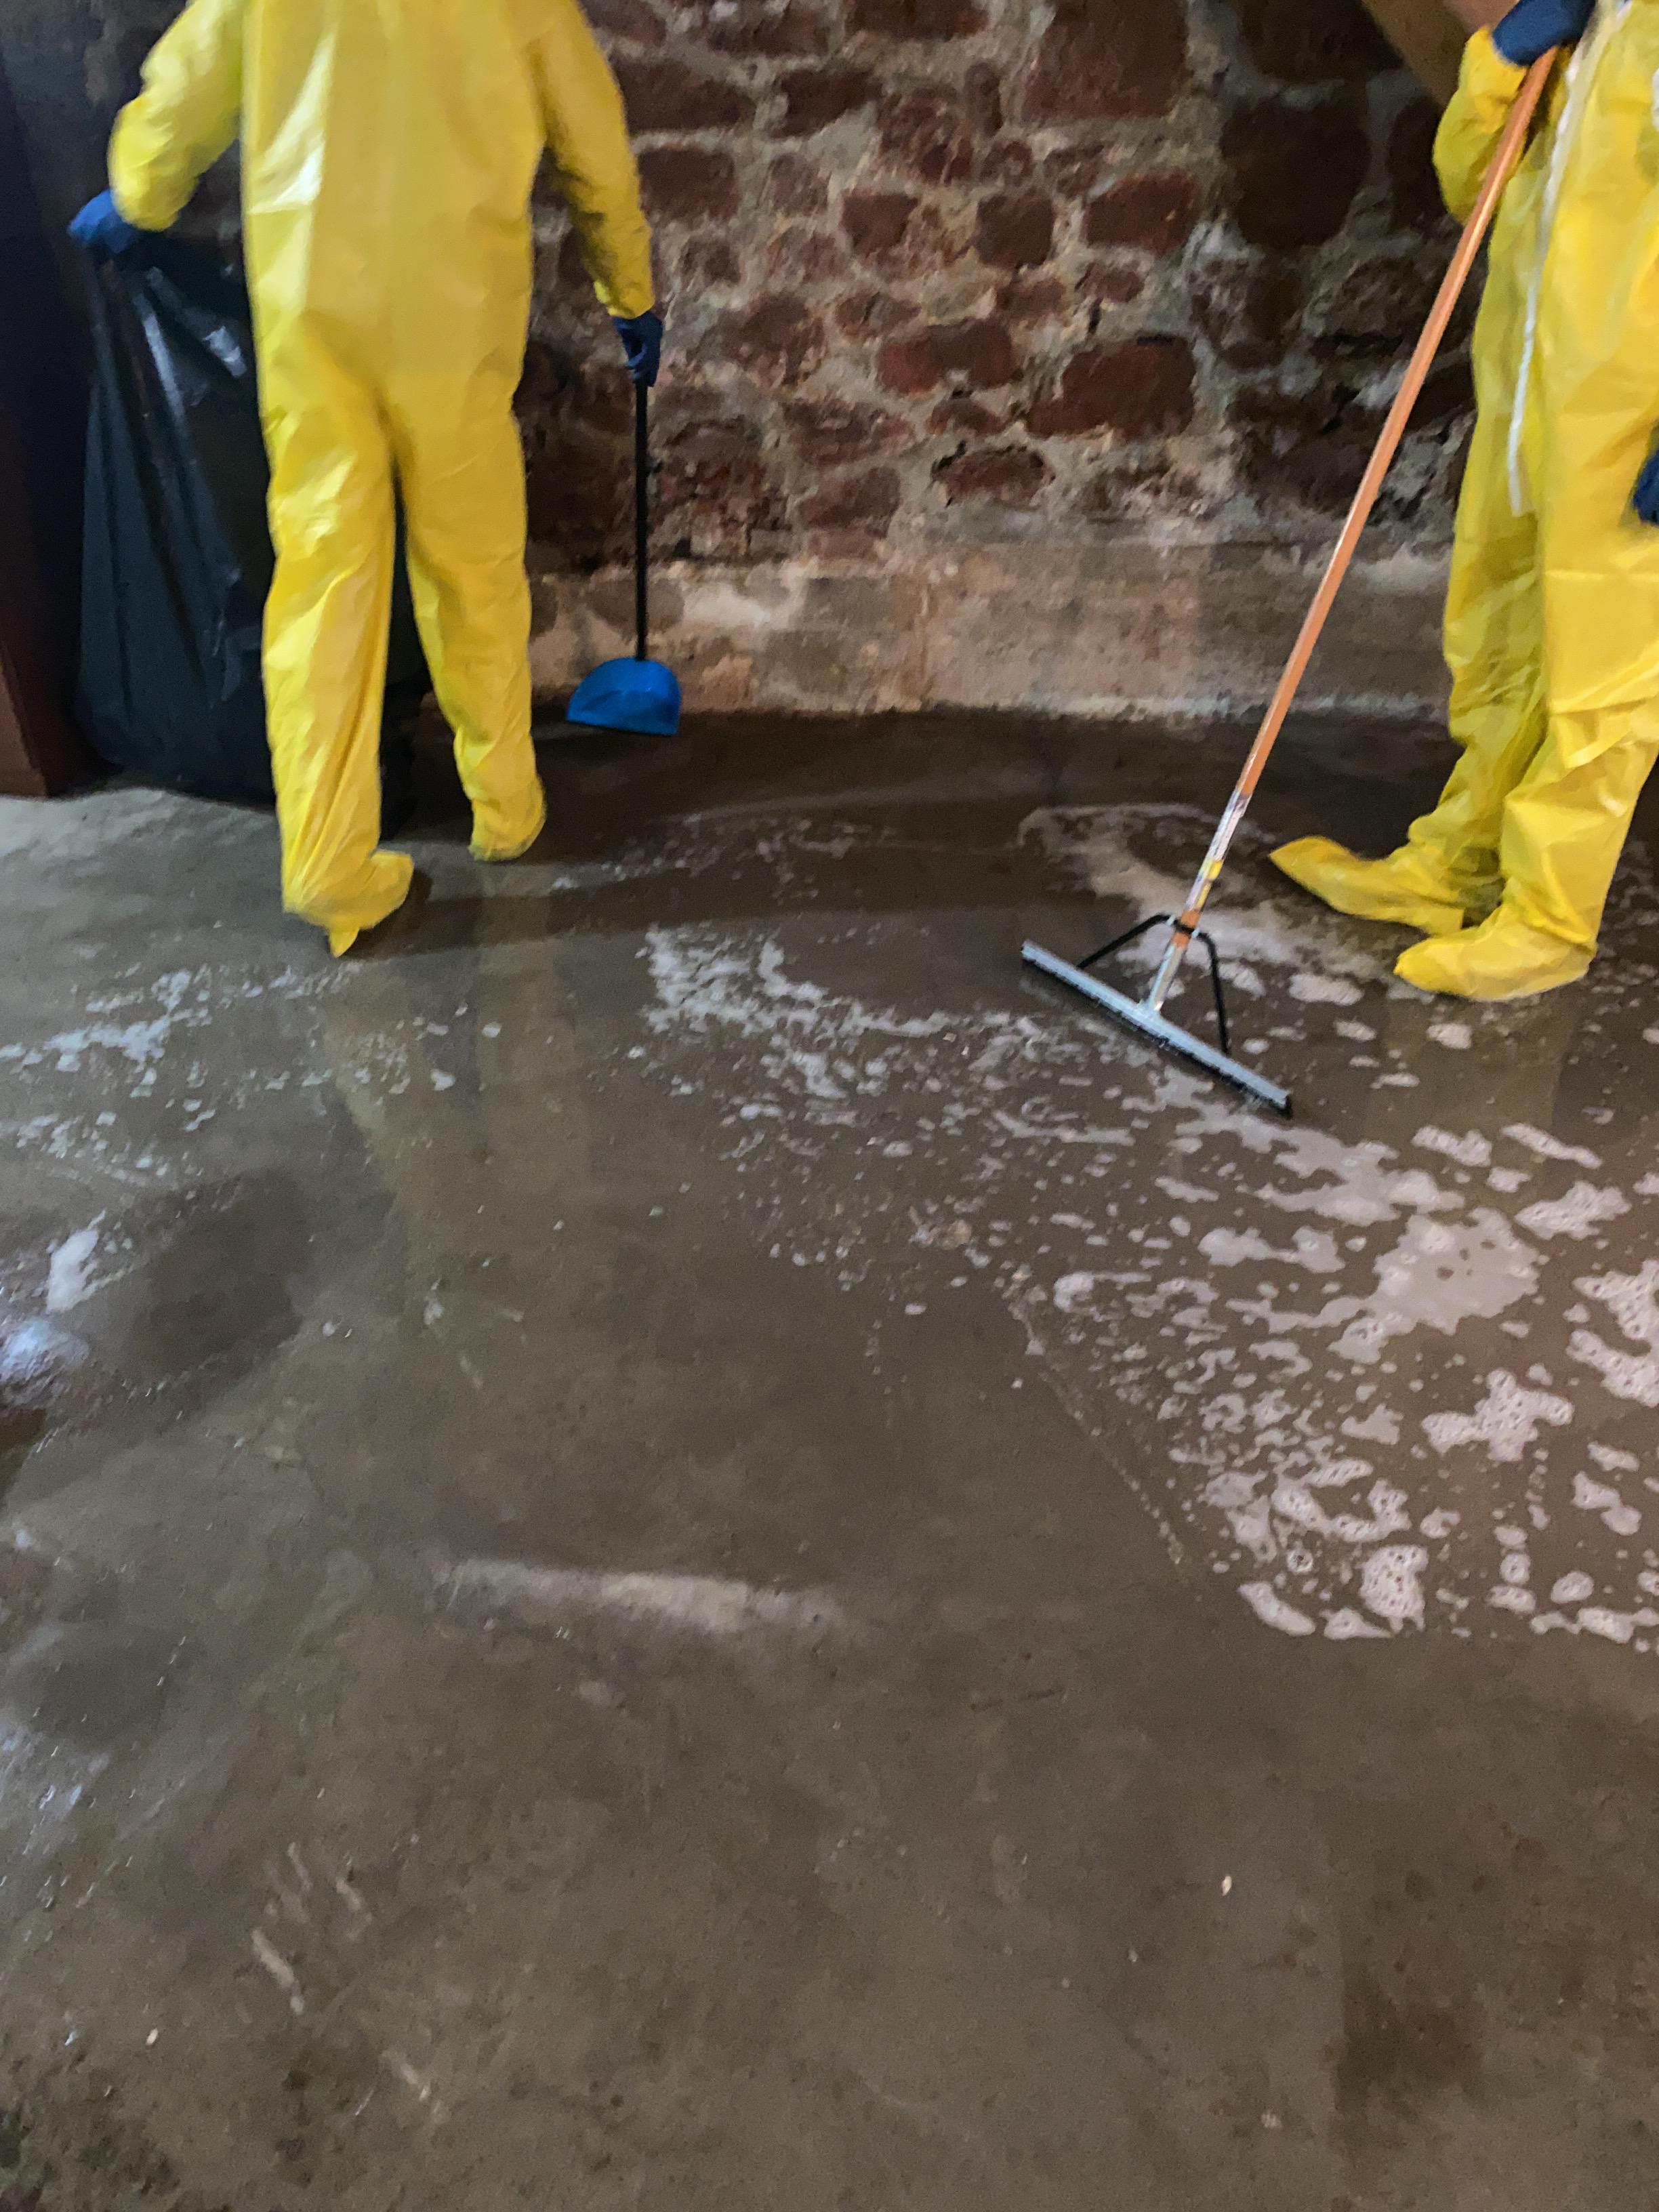 Cleaning and sanitizing after sewage loss.